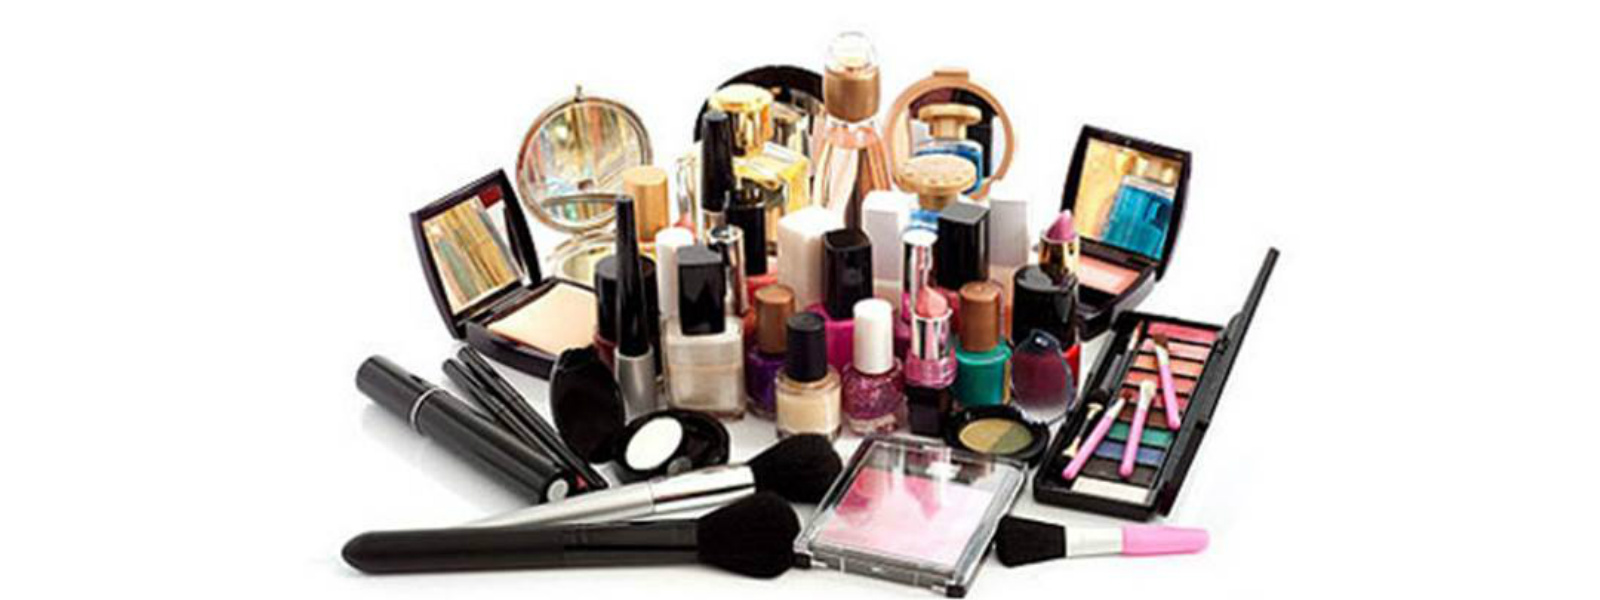 All cosmetic products to be regulated